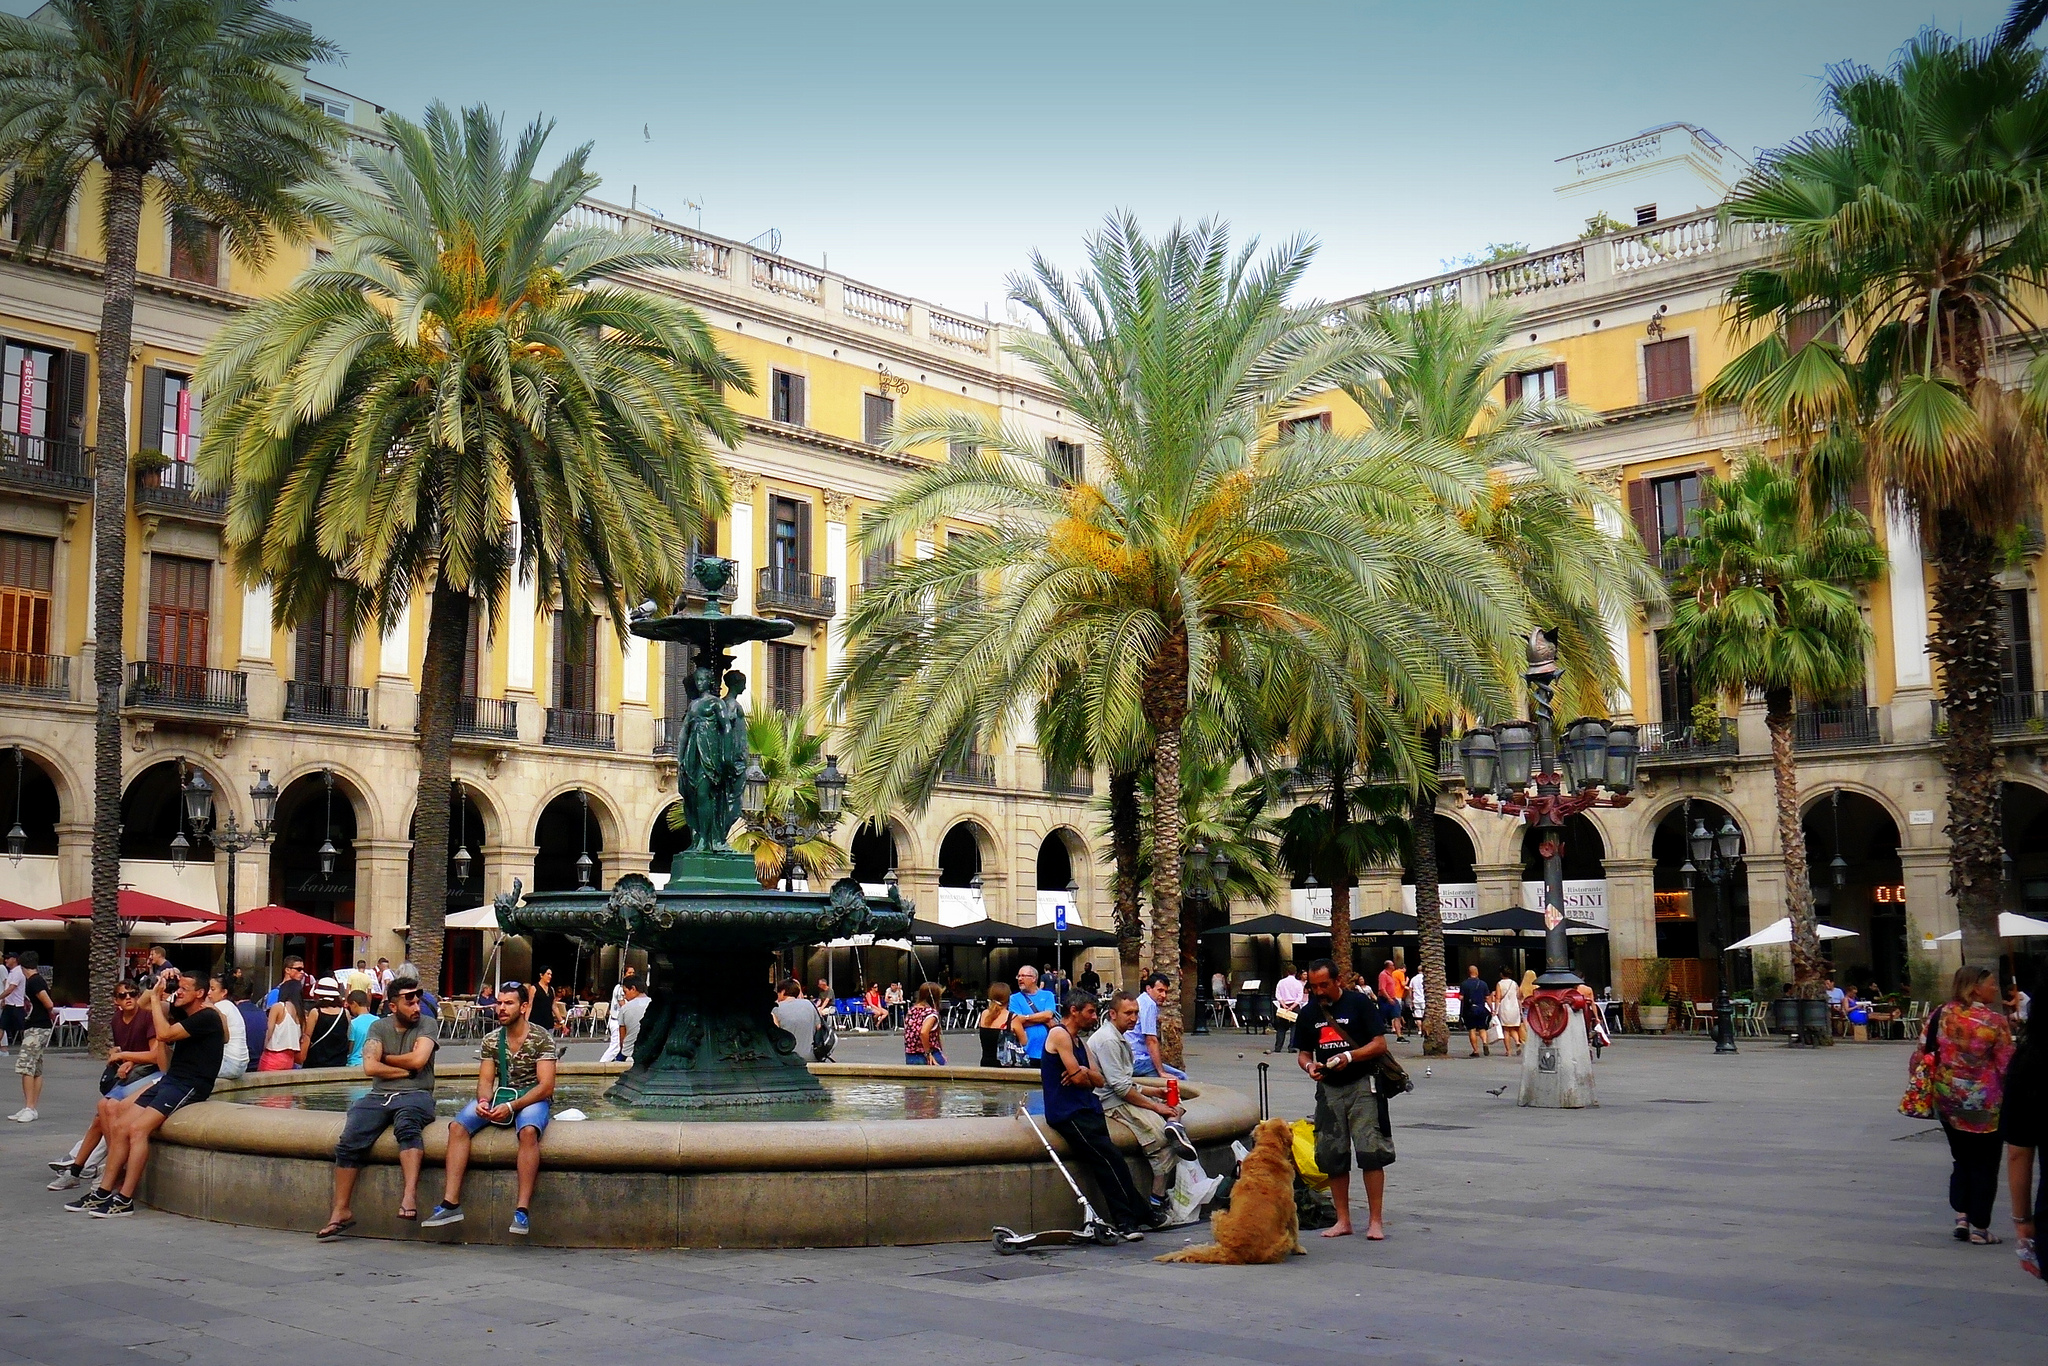 The Top 5 Things To Do in Barcelona